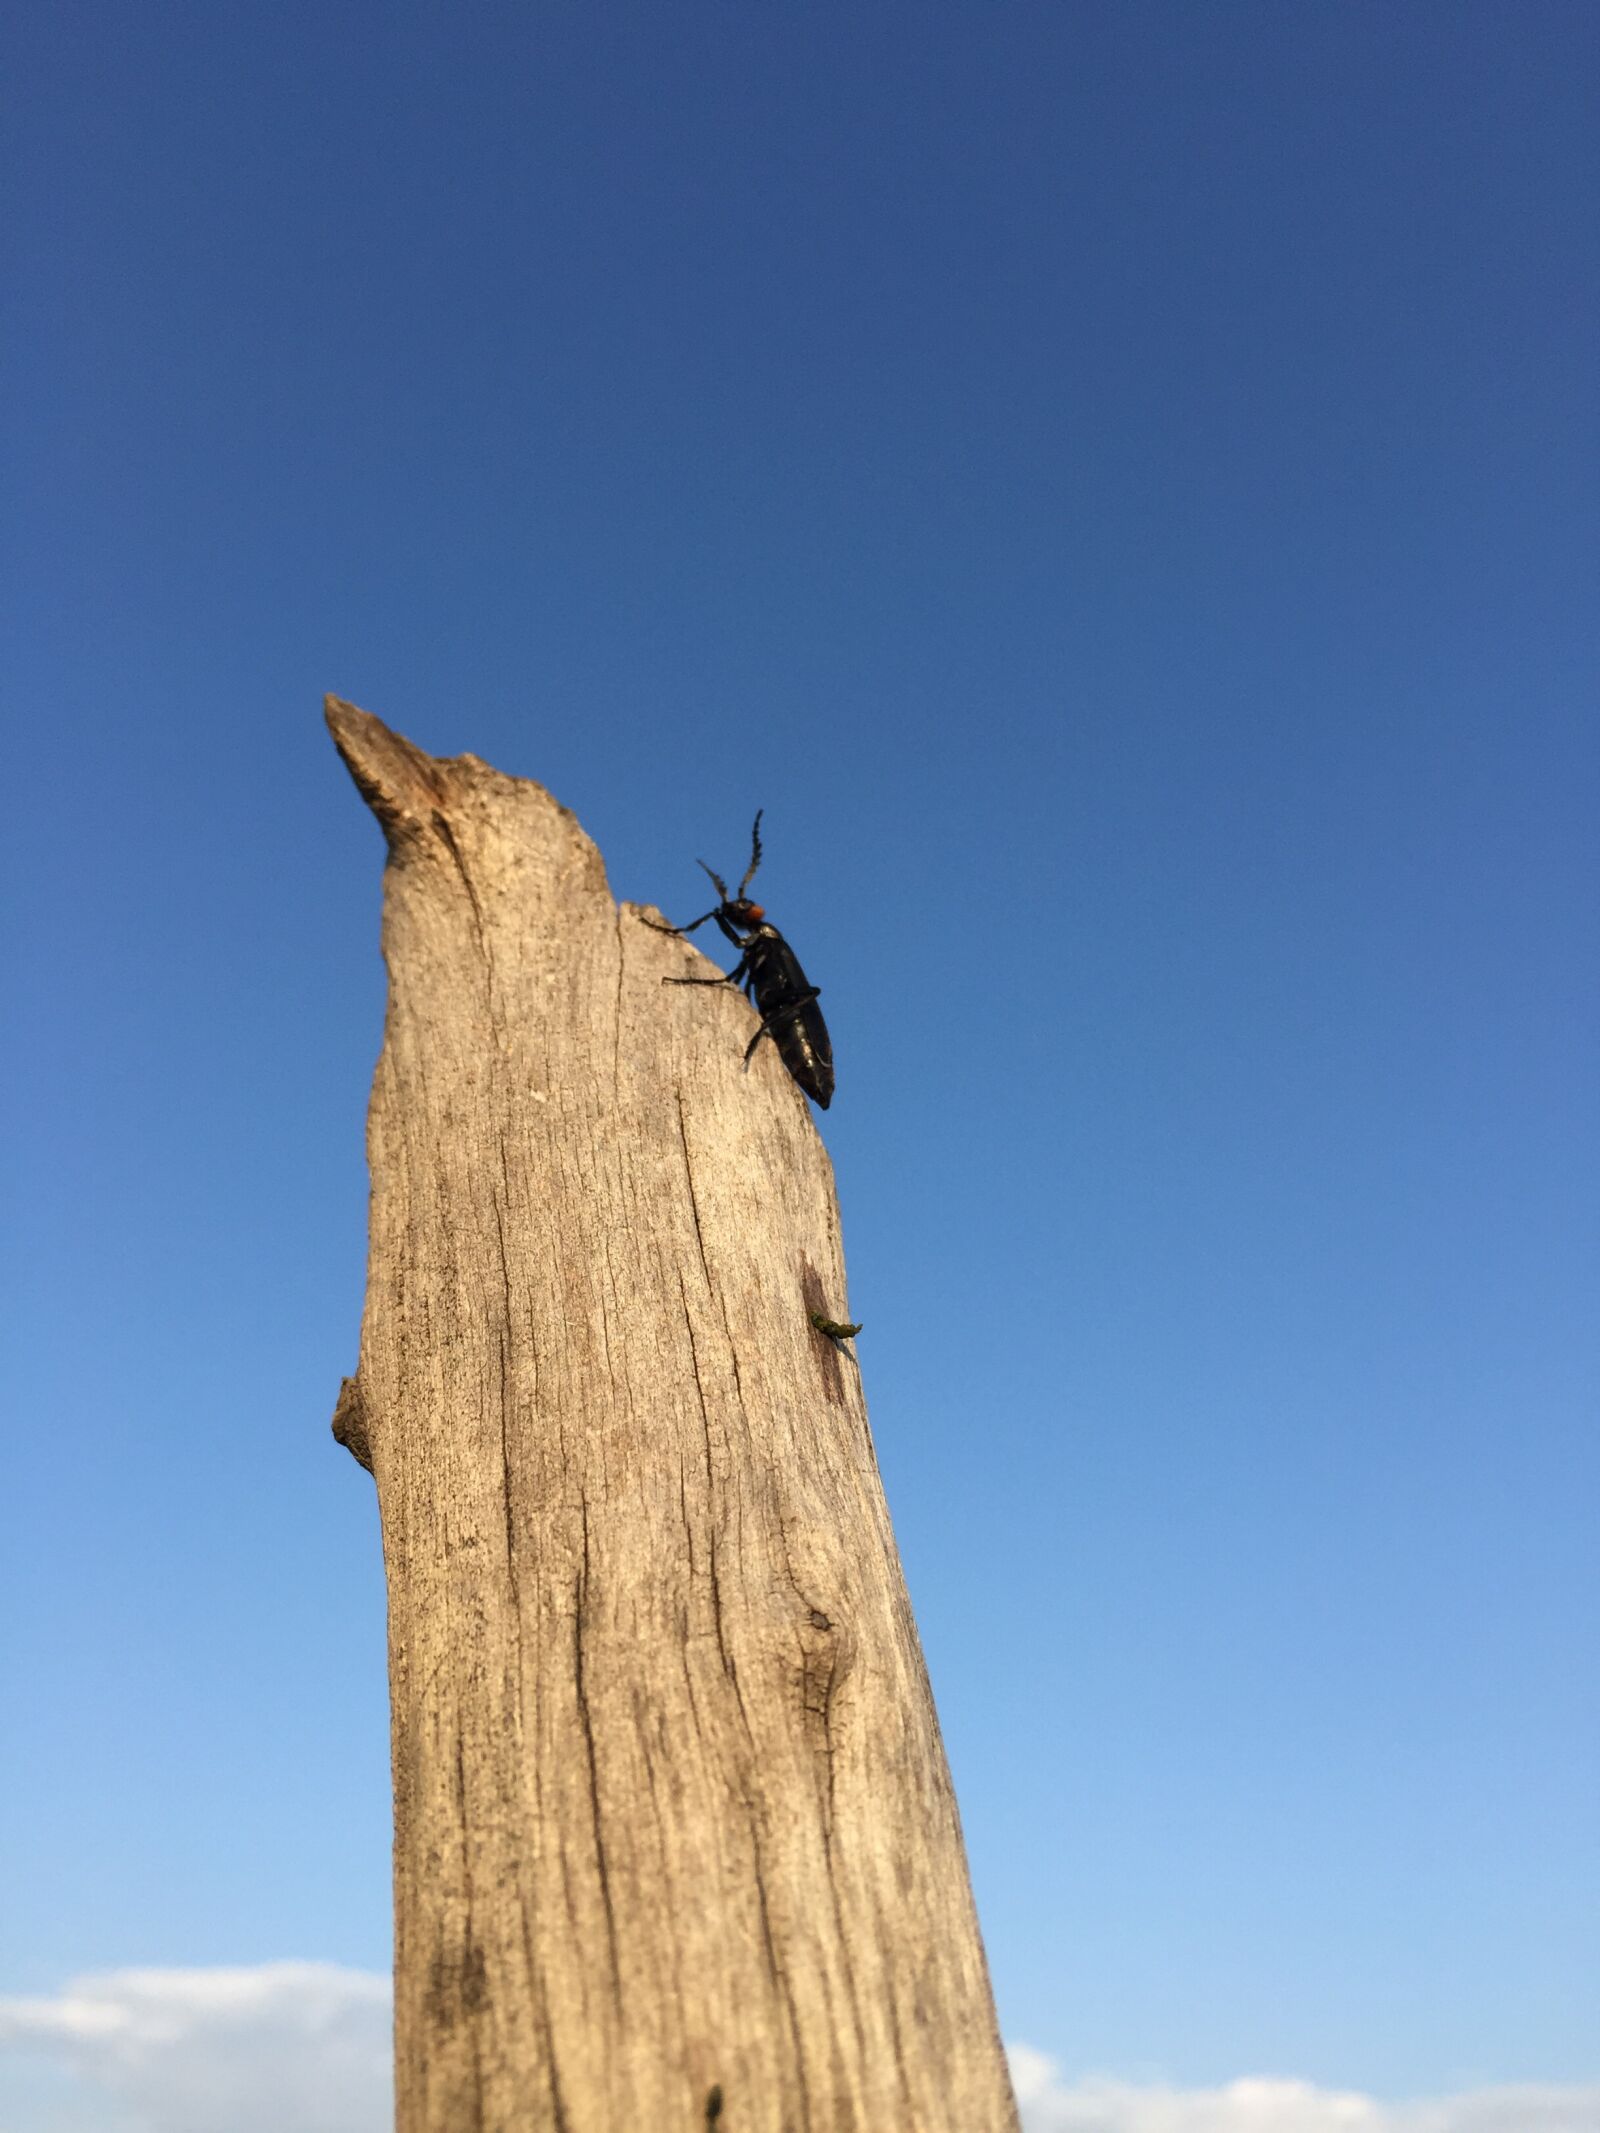 Apple iPhone 6 sample photo. Insect, prairie, blue sky photography